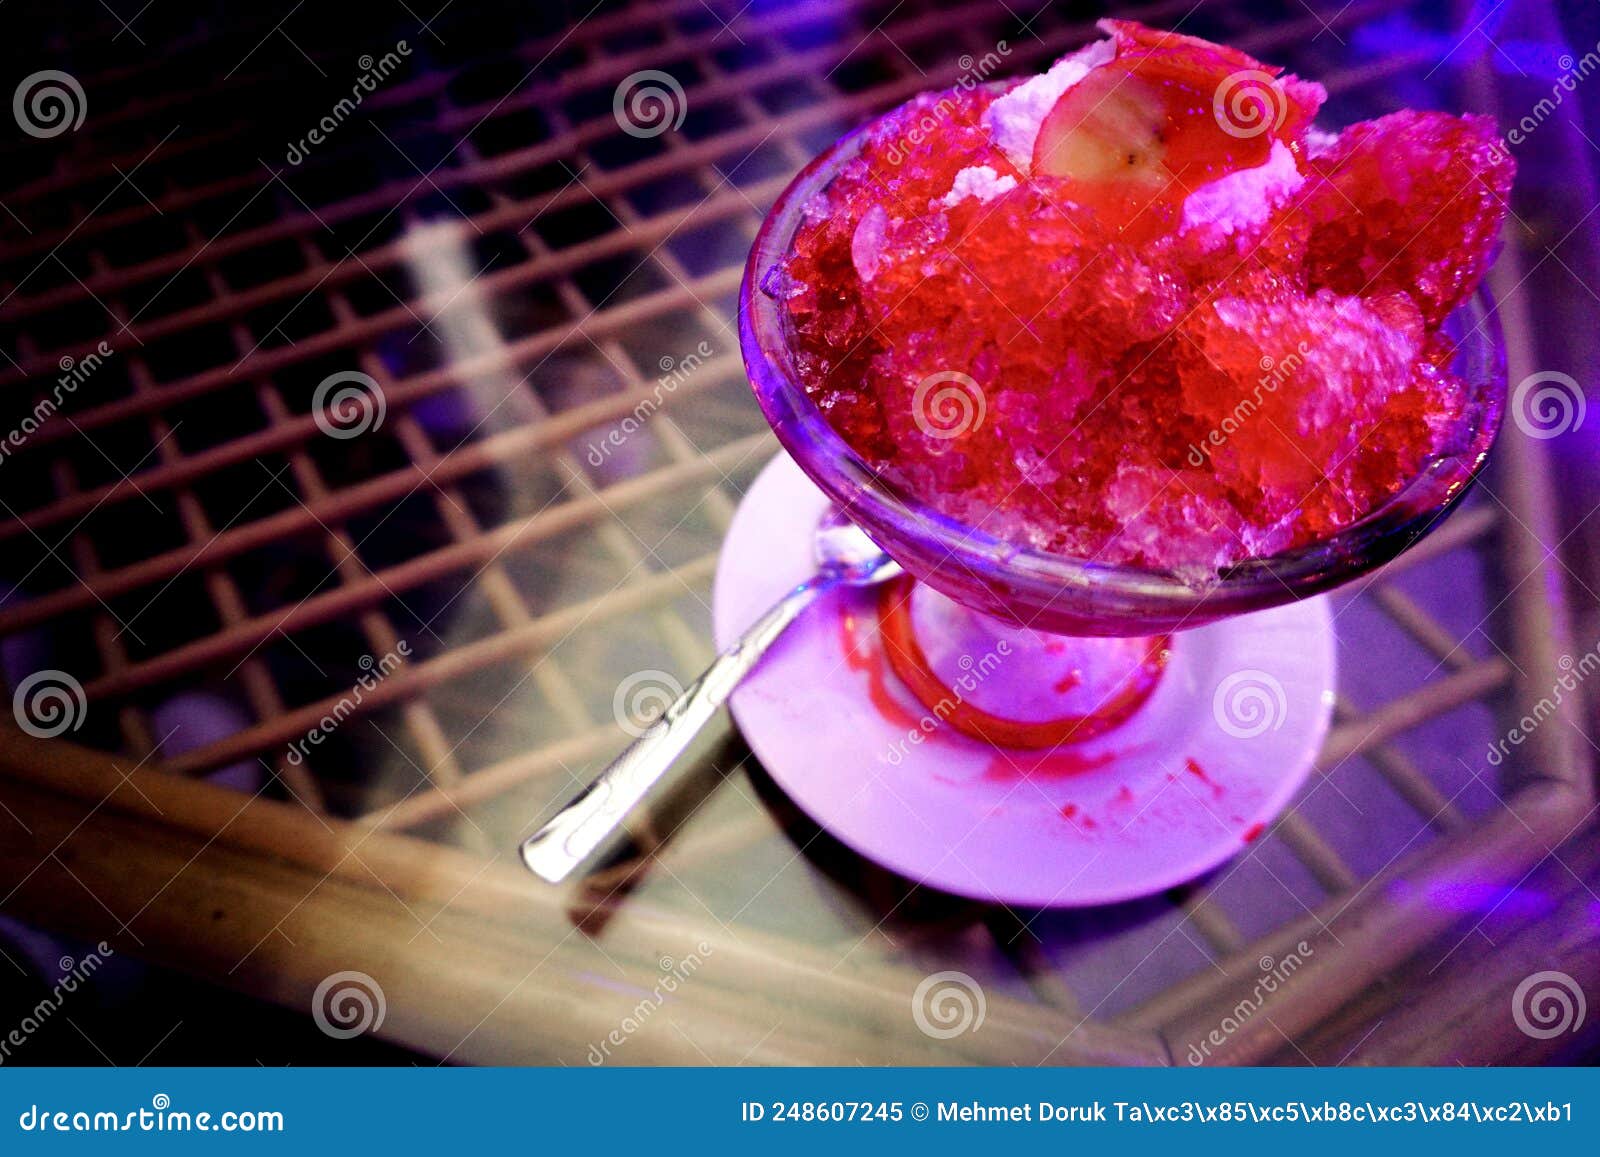 traditional starch serbet and snow dessert bici bici on a cup